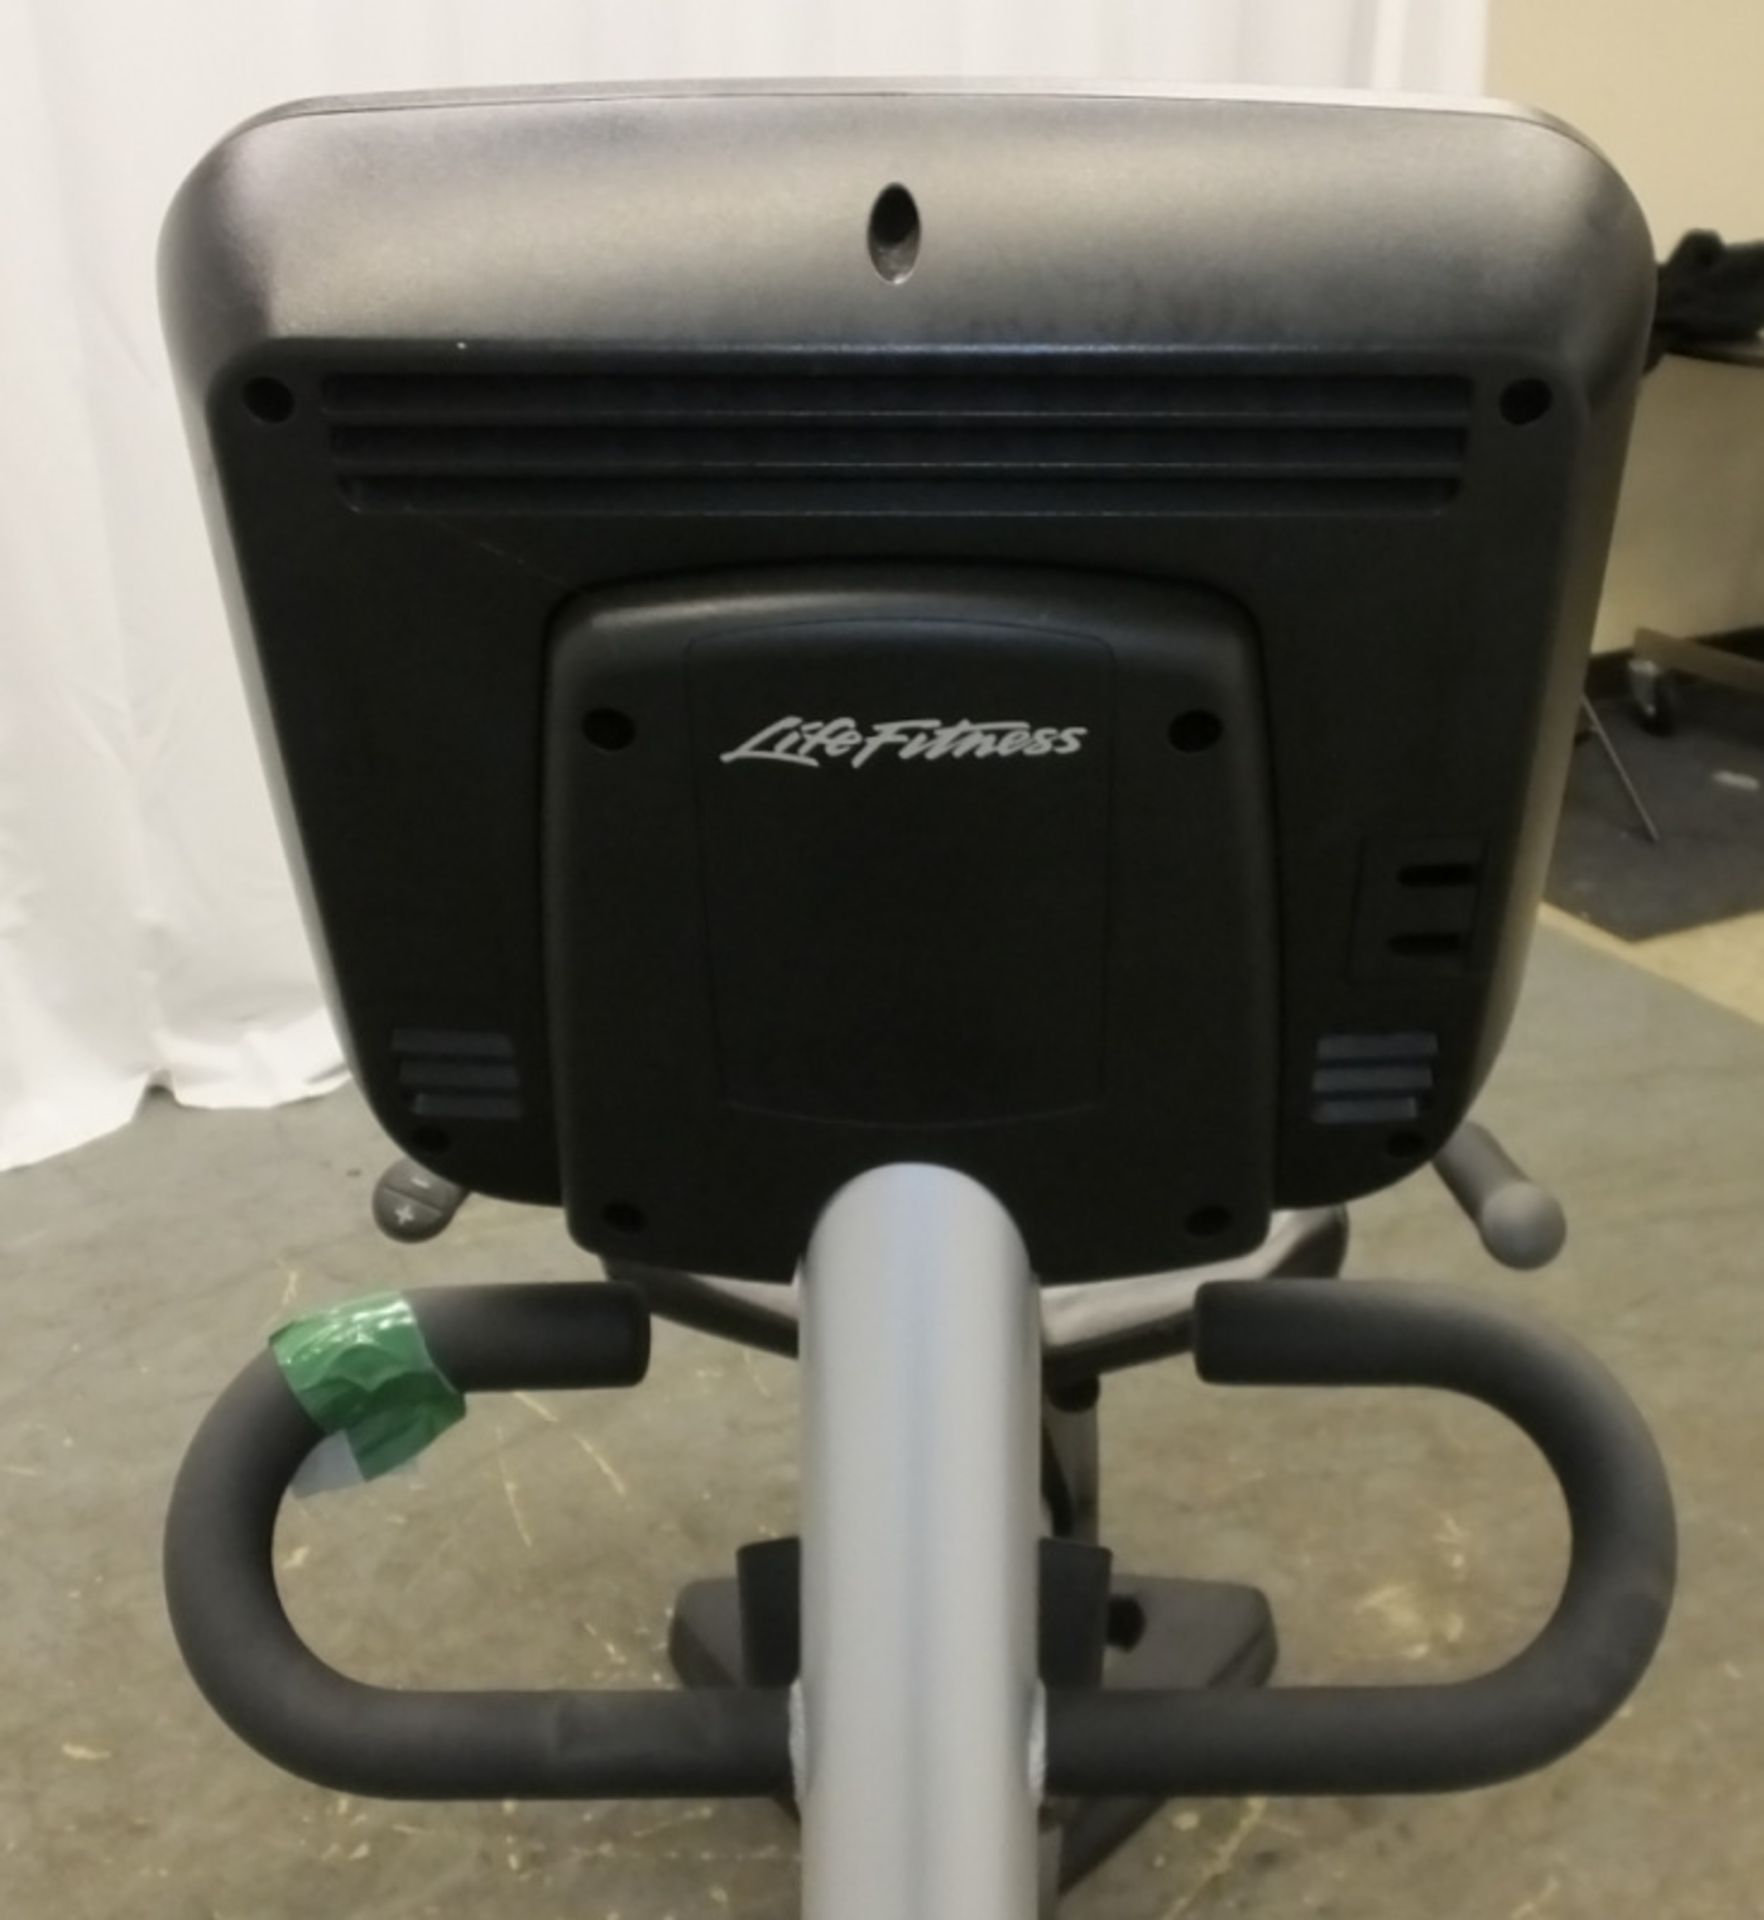 Life Fitness Life Cycle 95RS Recumbent Exercise Bike - Missing Power Pack - Image 8 of 9